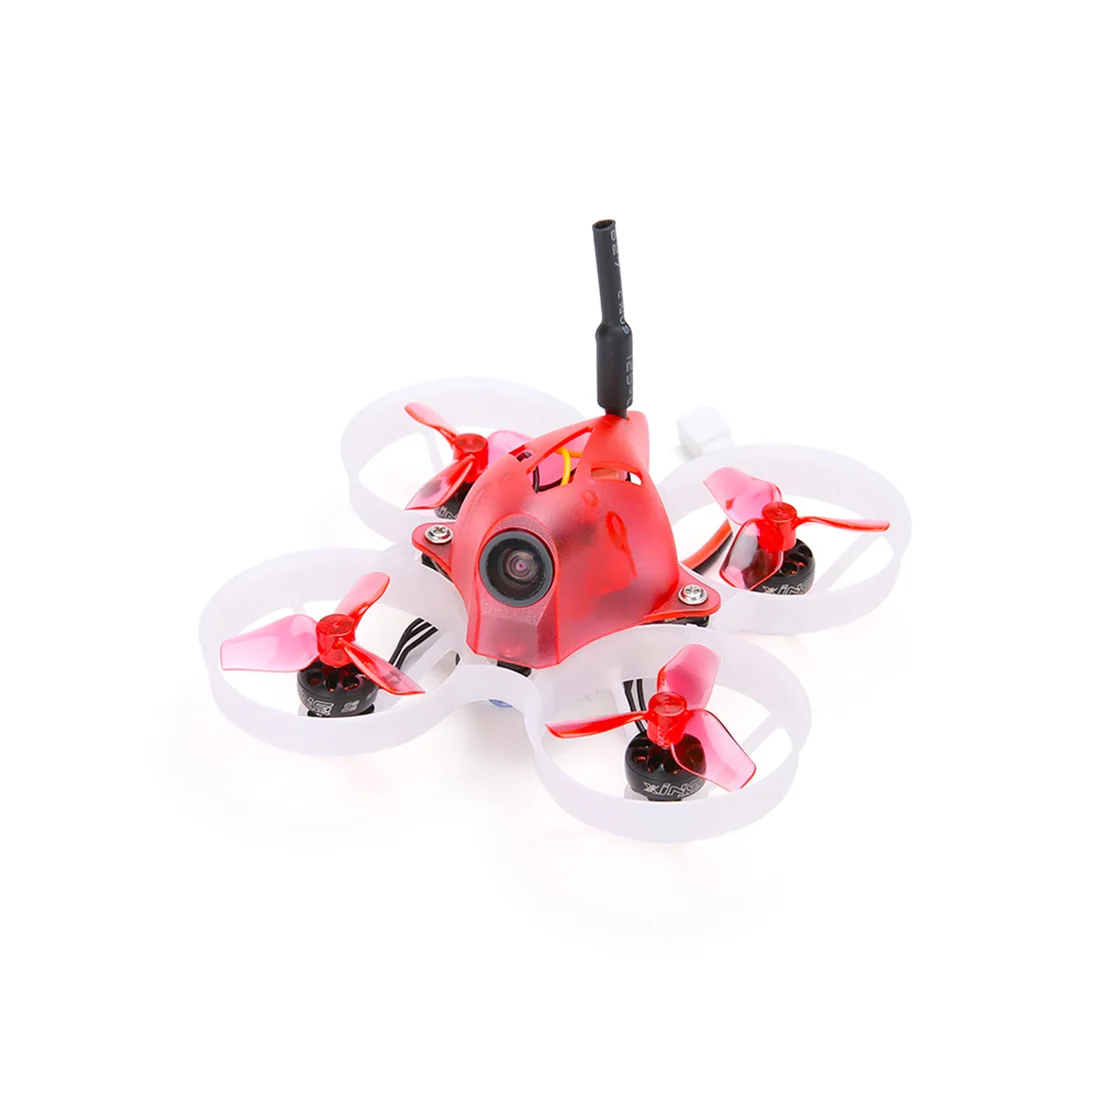 

iFlight Alpha A65 65mm Tiny BWhoop RC Quadcopter PNP BNF with 800TVL 150° FPV Camera for FPV Drone Version For Christmas Gift